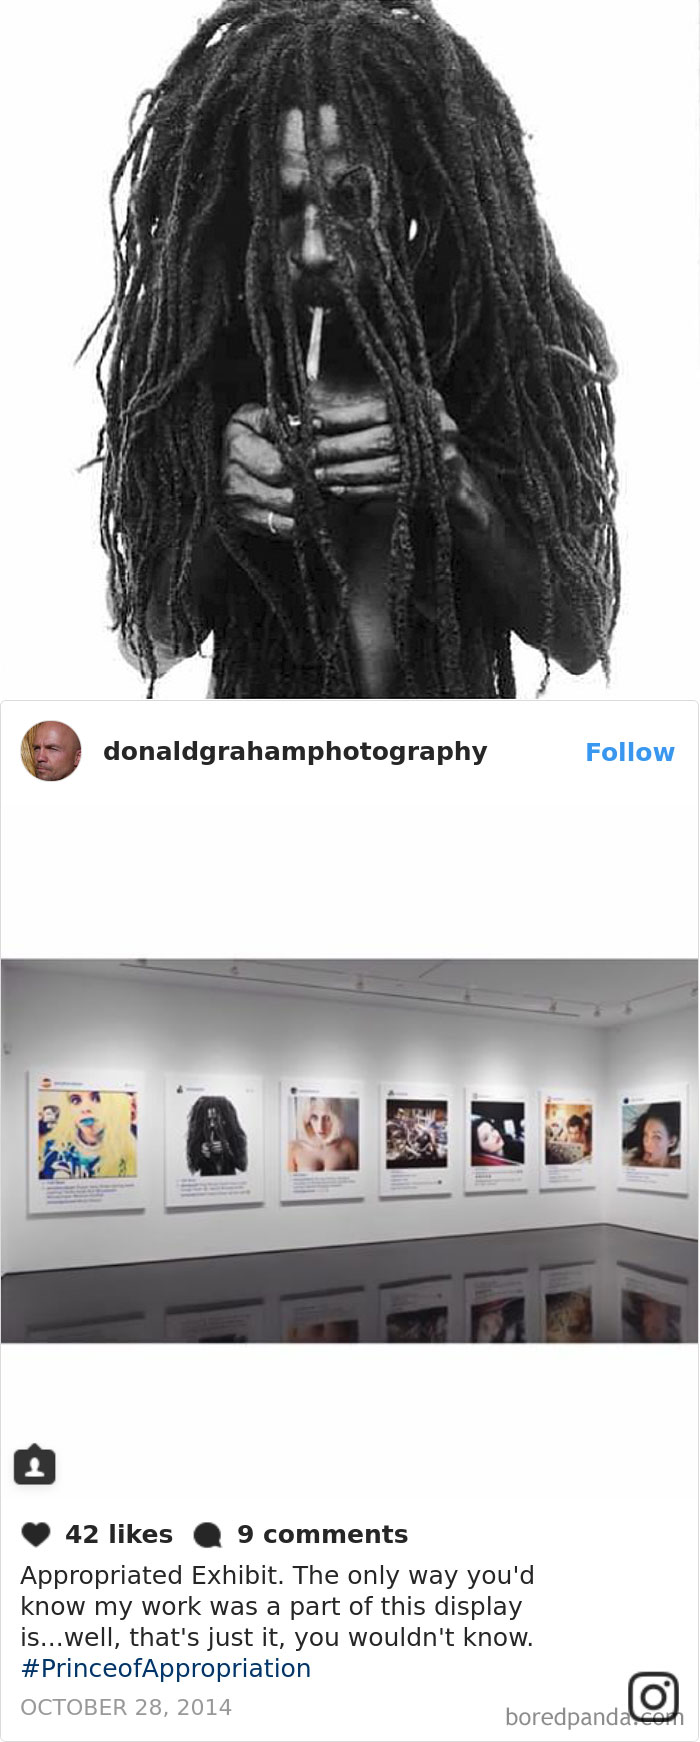 Controversial Artist Richard Prince Exhibits And Sells Screenshots Of Other Photographers’ Instagram Photos Without Permission